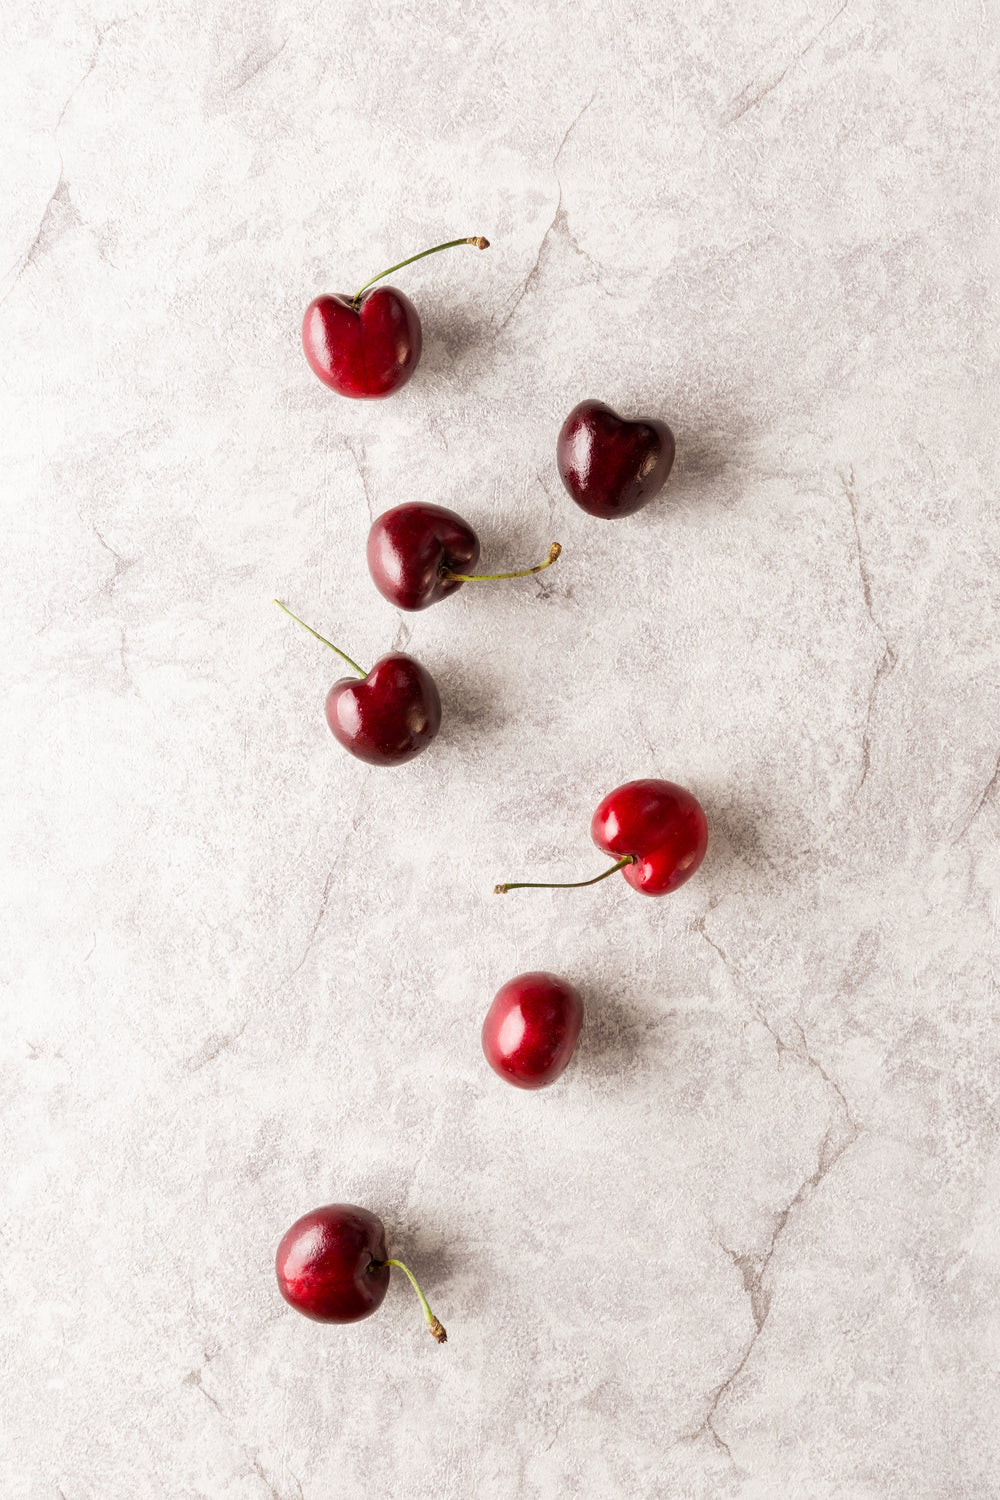 cherries scattered across marble surface